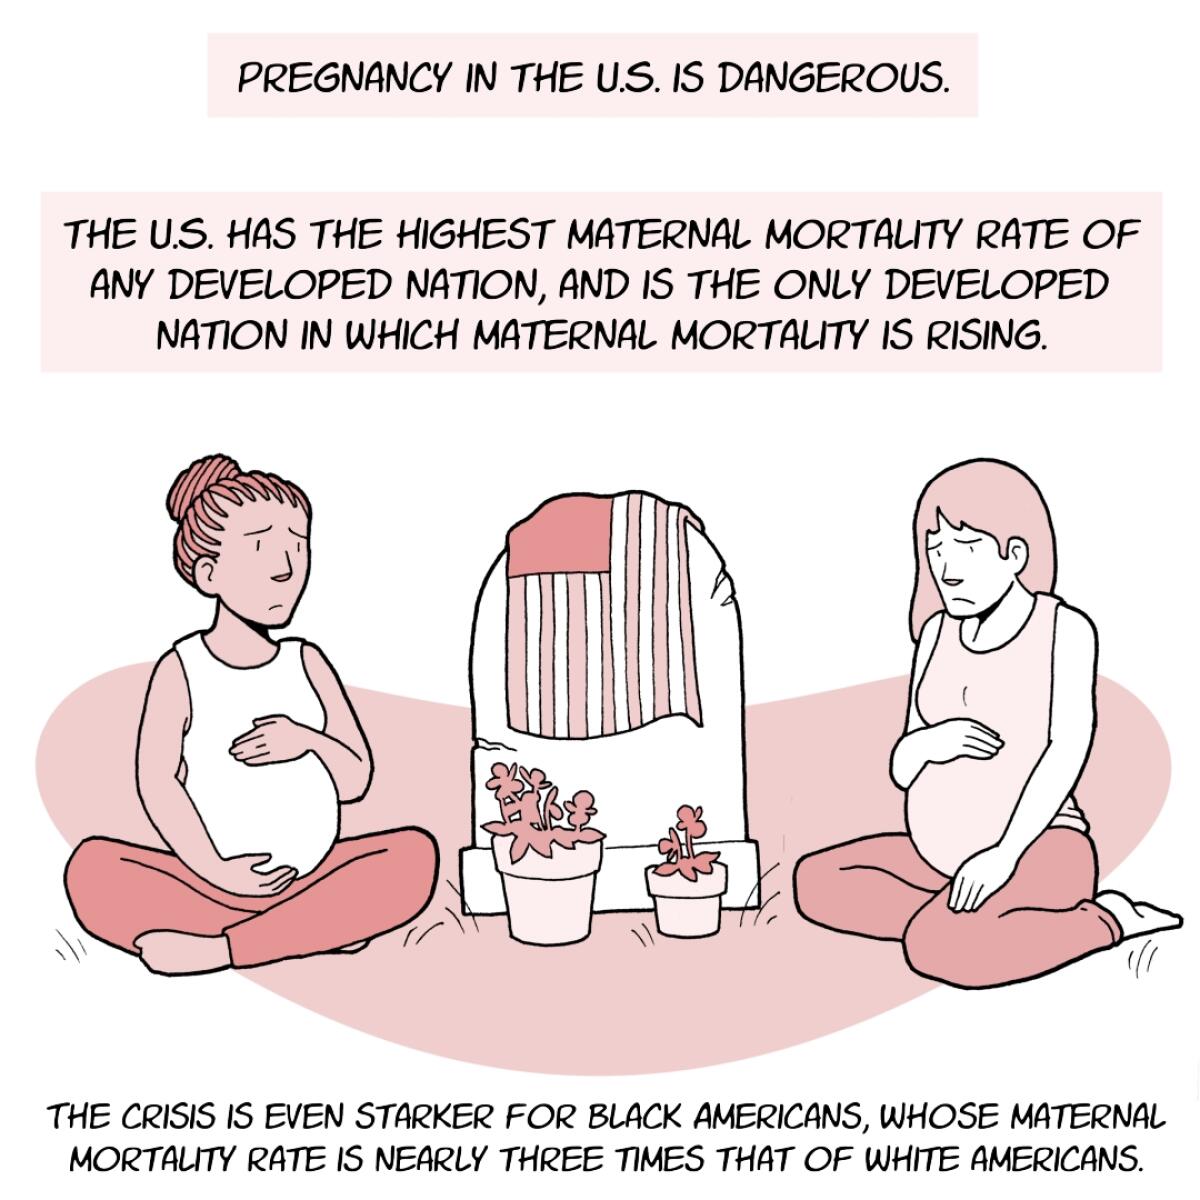 The U.S. has the highest maternal mortality rate of any developed nation, and the rate is worse for Black Americans.